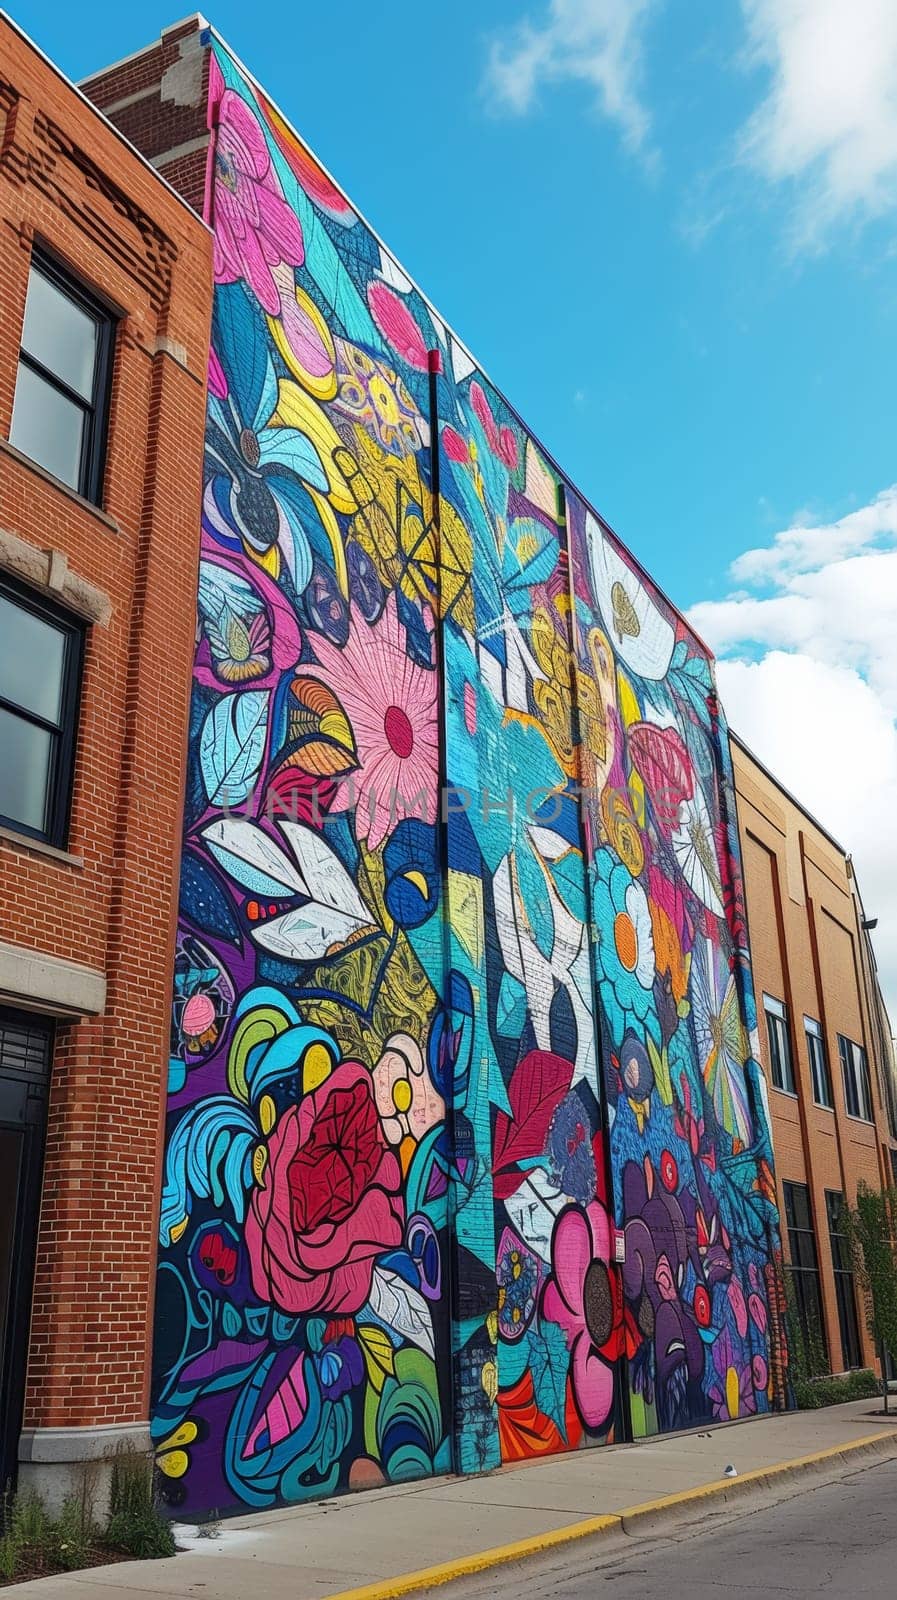 A large colorful mural on the side of a building next to some trees, AI by starush